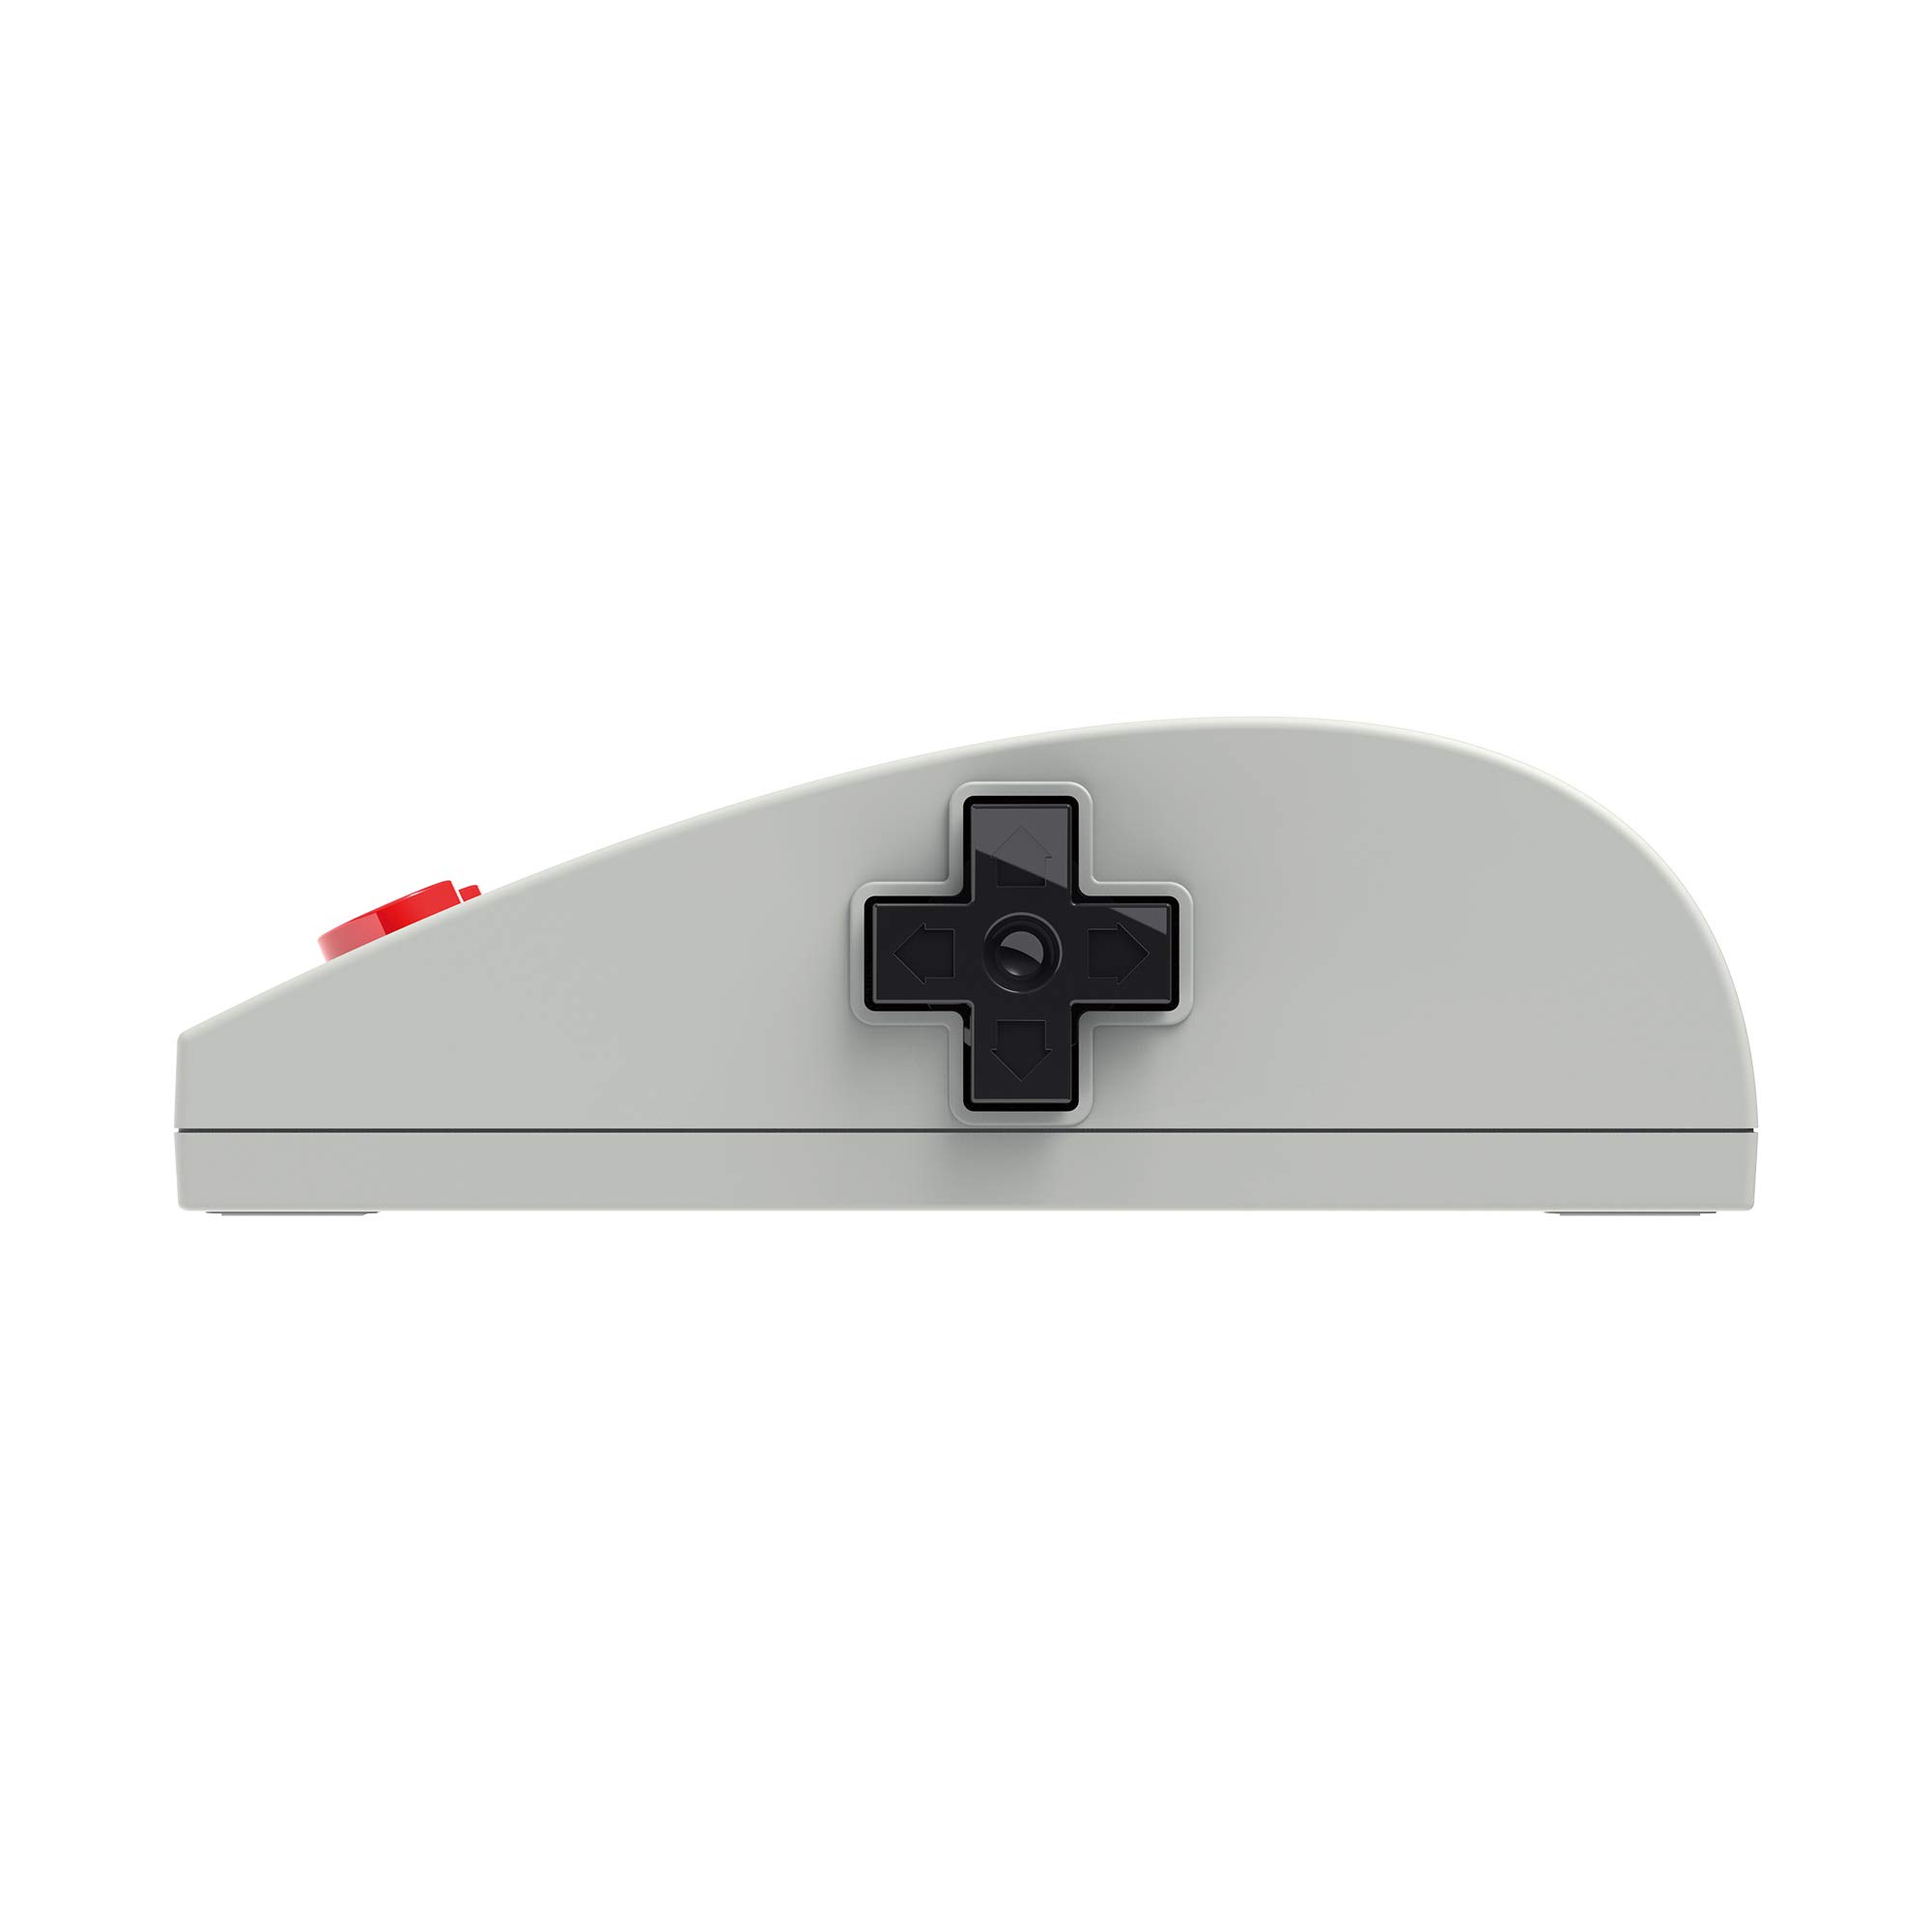 8Bitdo N30 2.4Ghz Wireless Mouse for PC Windows and macOS